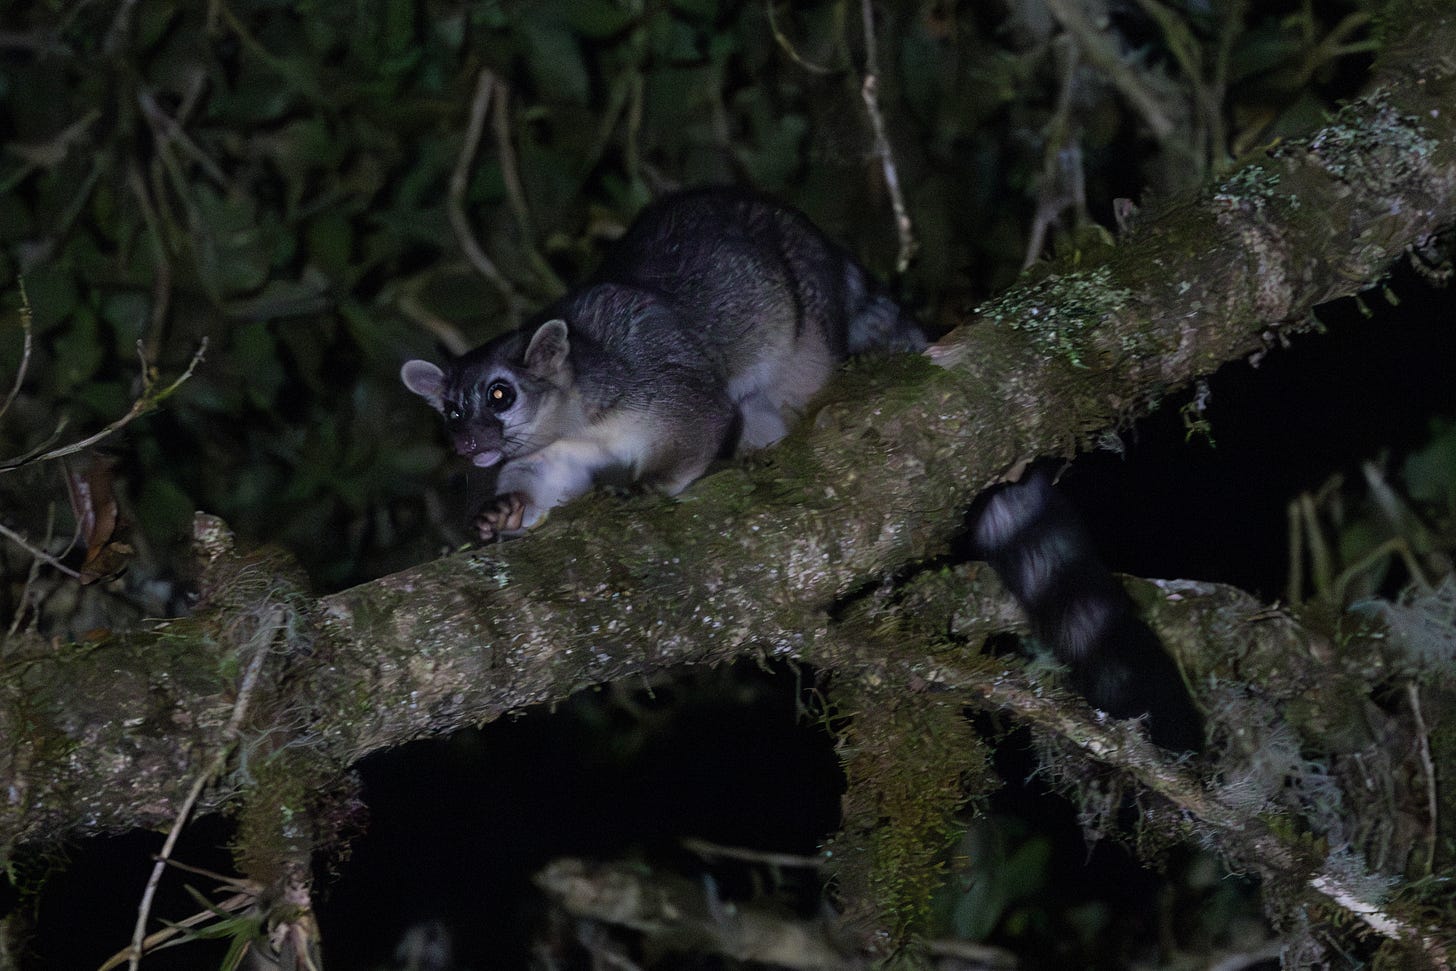 a big-eyed mammal that looks like a raccoon but with a more cat-like face and a long ring tail, walking to the left along a branch in the dark. it is illuminated and its eyes are shiny looking.